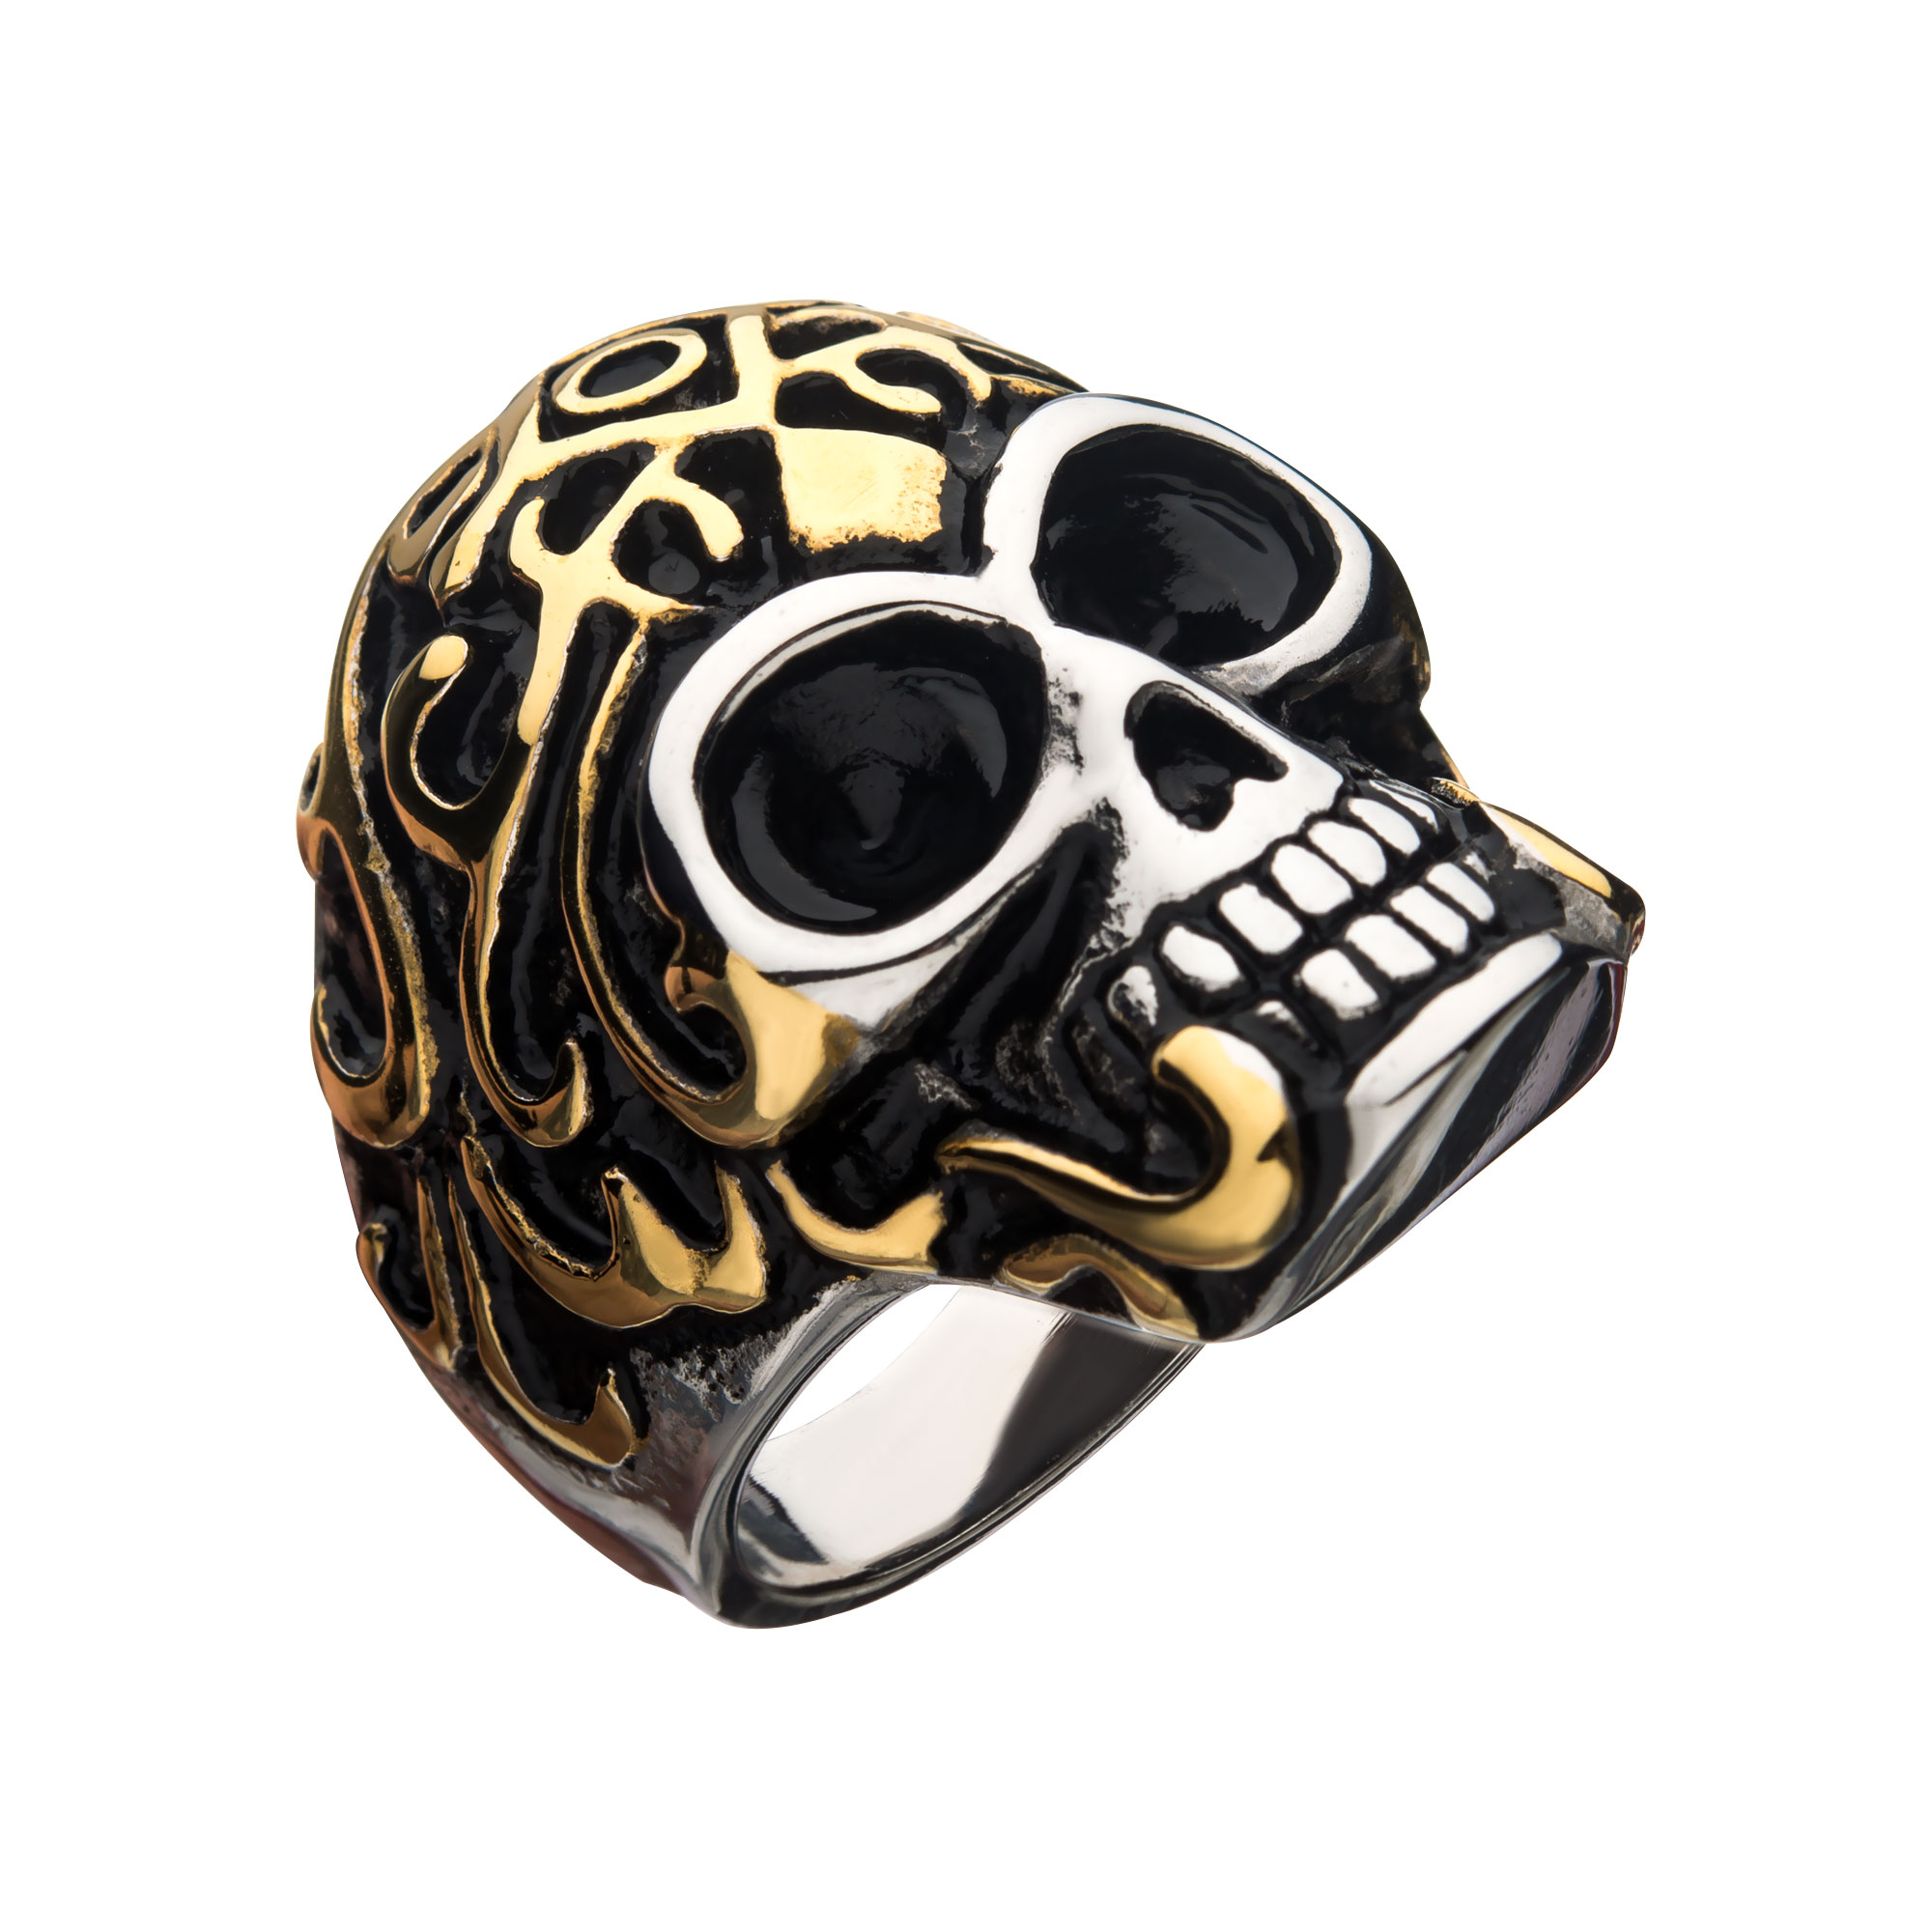 Oxidized Stainless Steel & Gold IP Skull Ring Selman's Jewelers-Gemologist McComb, MS